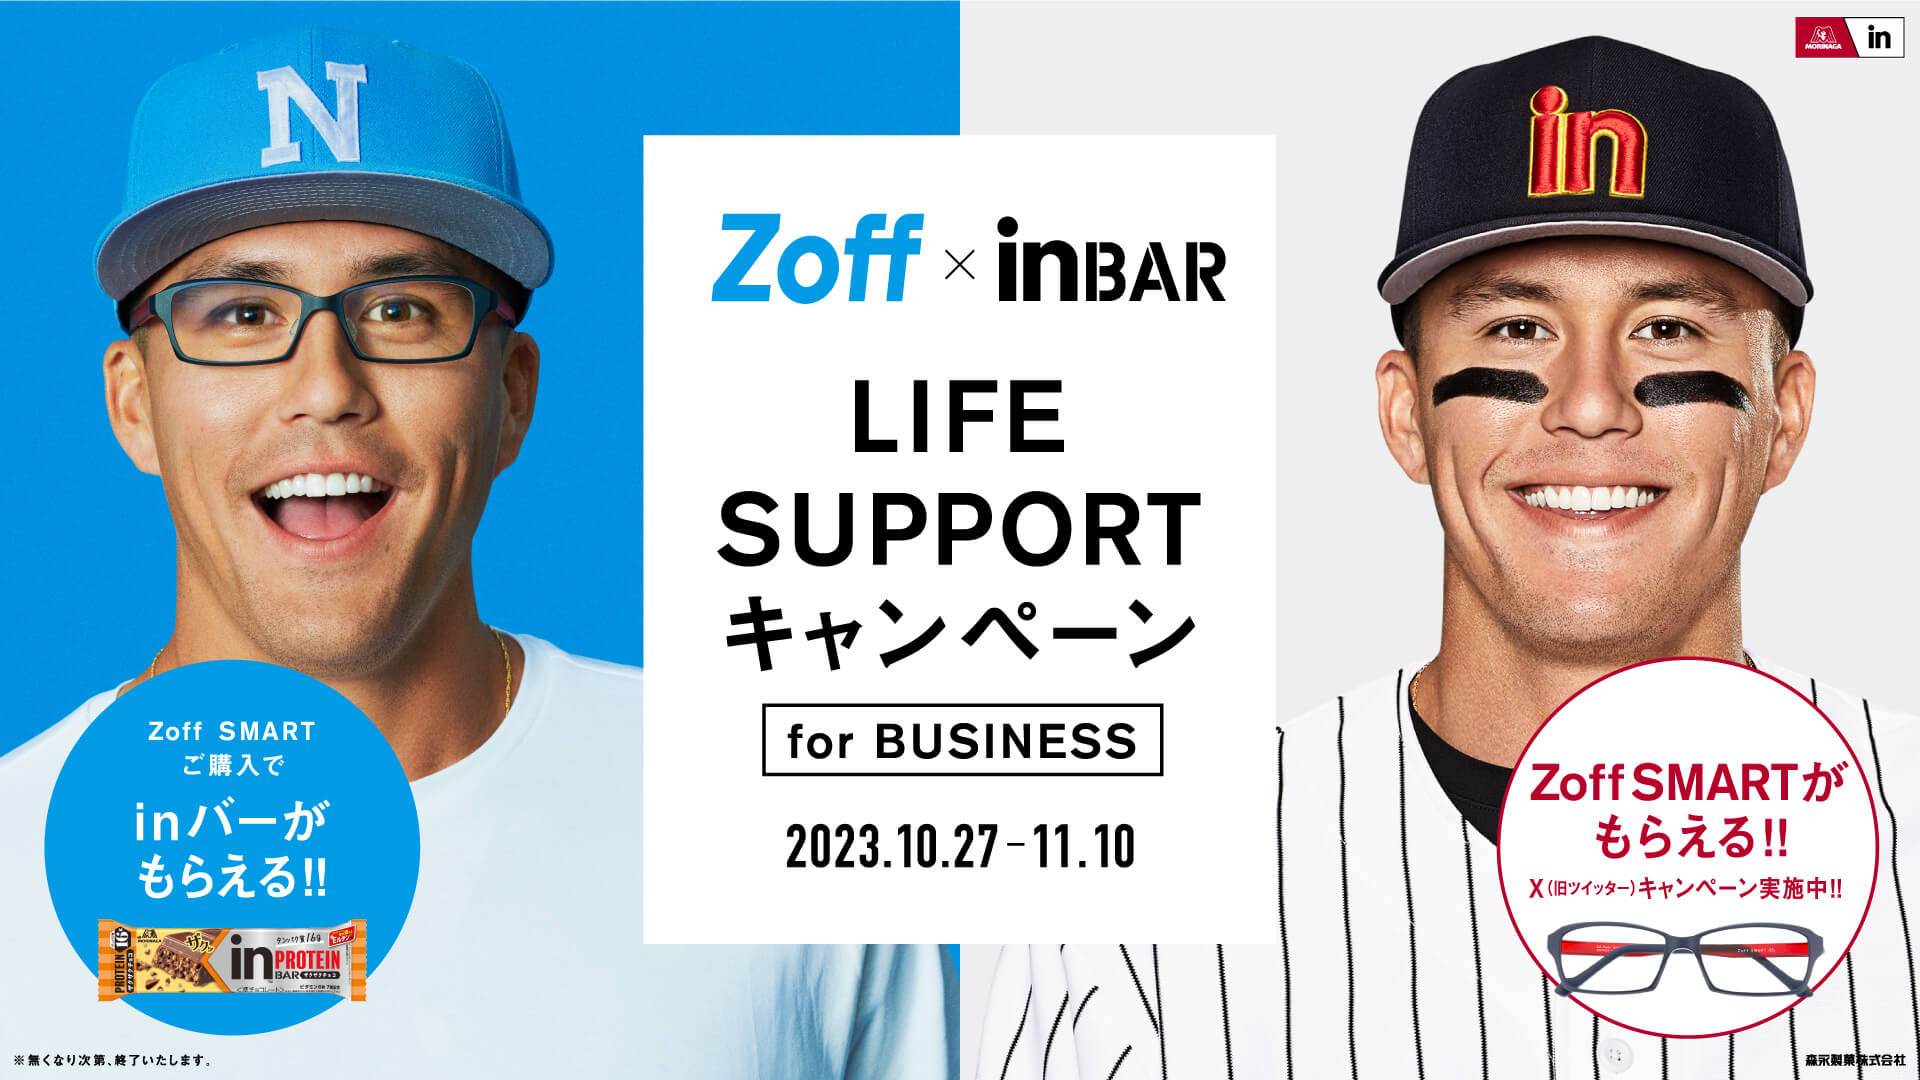 Zoff x in BAR LIFE SUPPORTキャンペーン